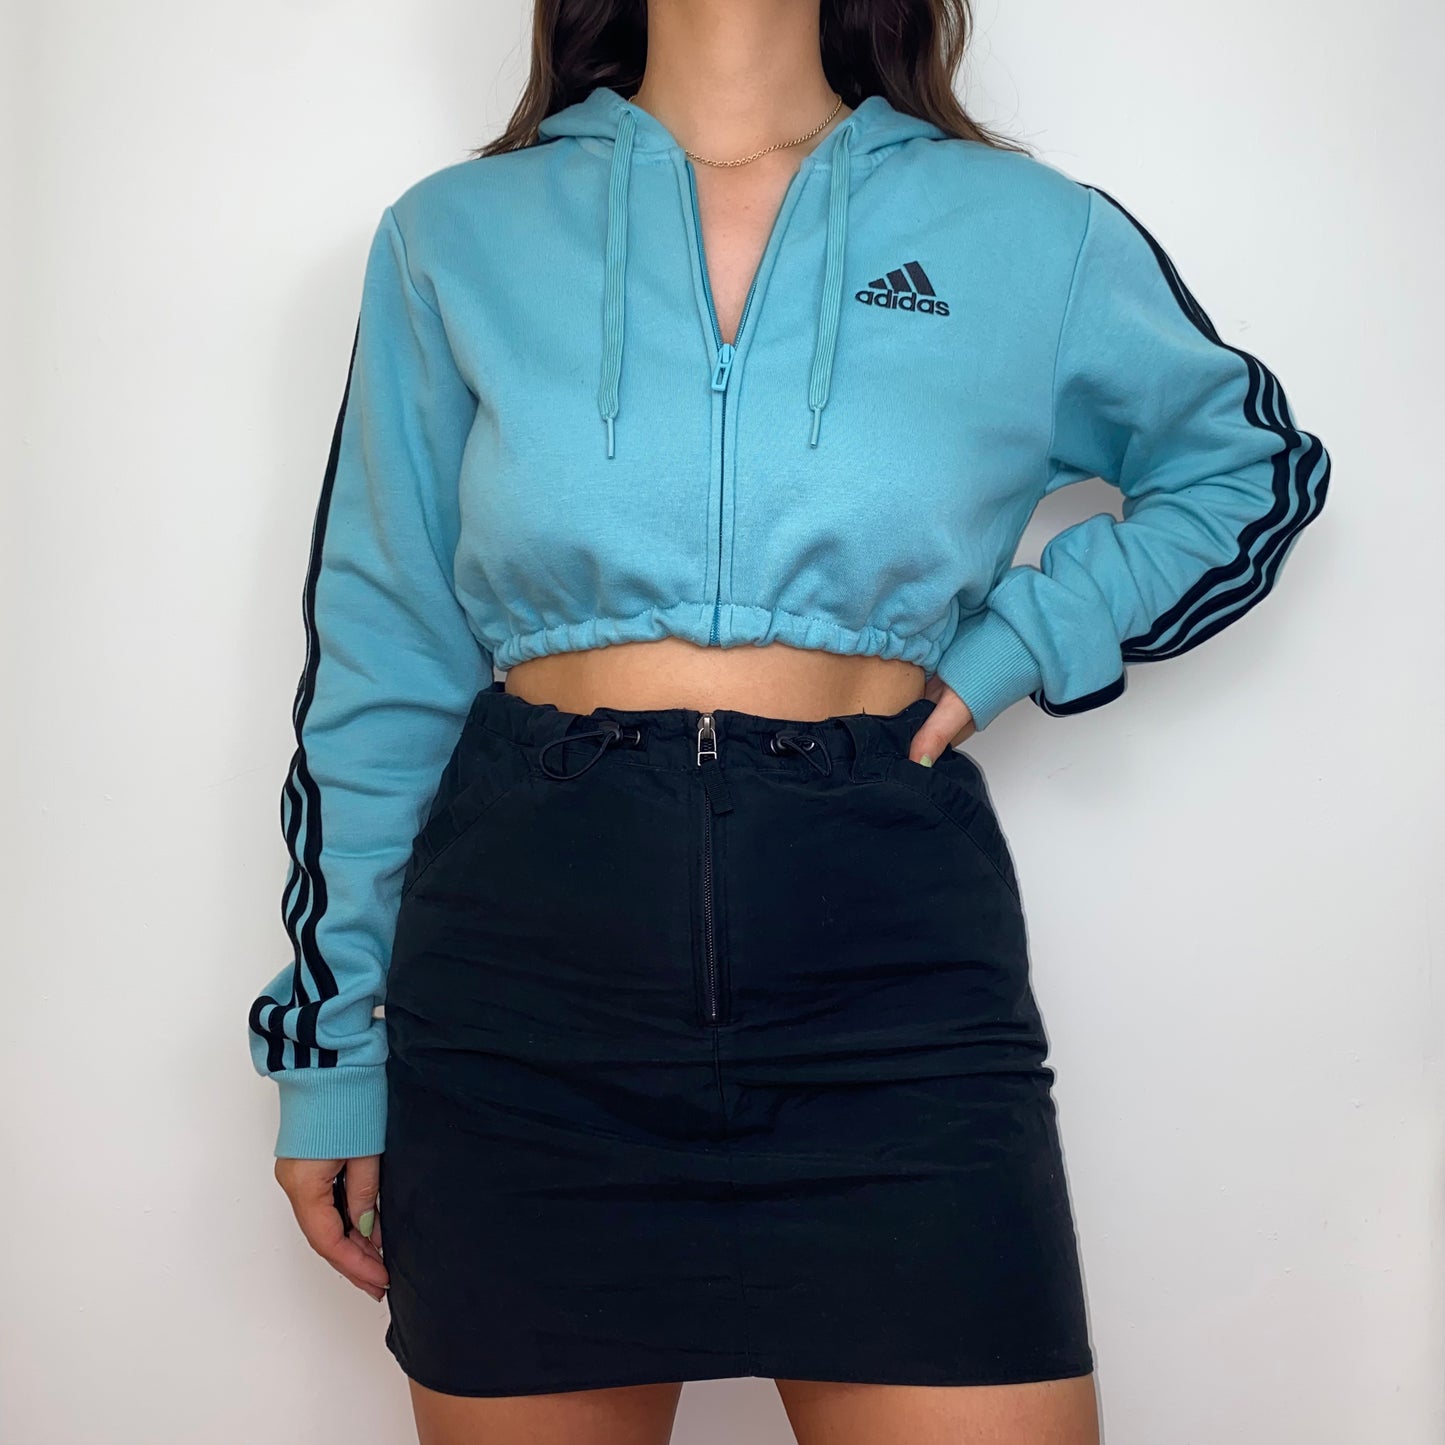 blue zip up crop hoodie with black adidas logo shown on a model wearing a black skirt